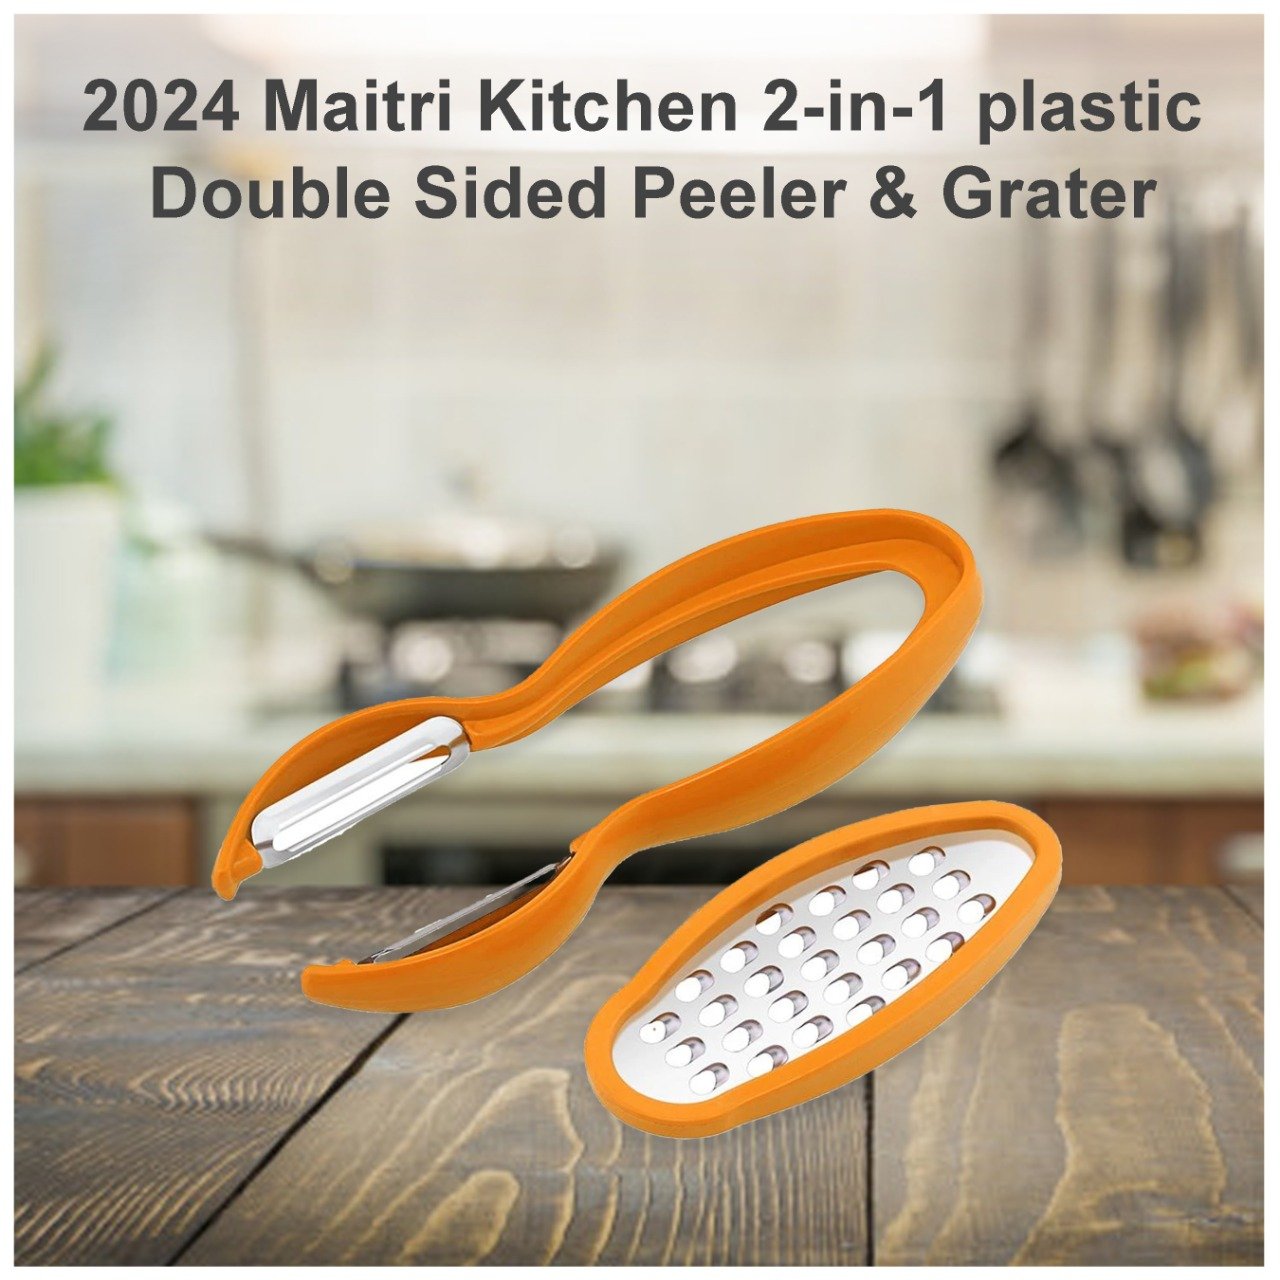 2024 Maitri Kitchen 2-in-1 plastic Double Sided Peeler & Grater - SkyShopy